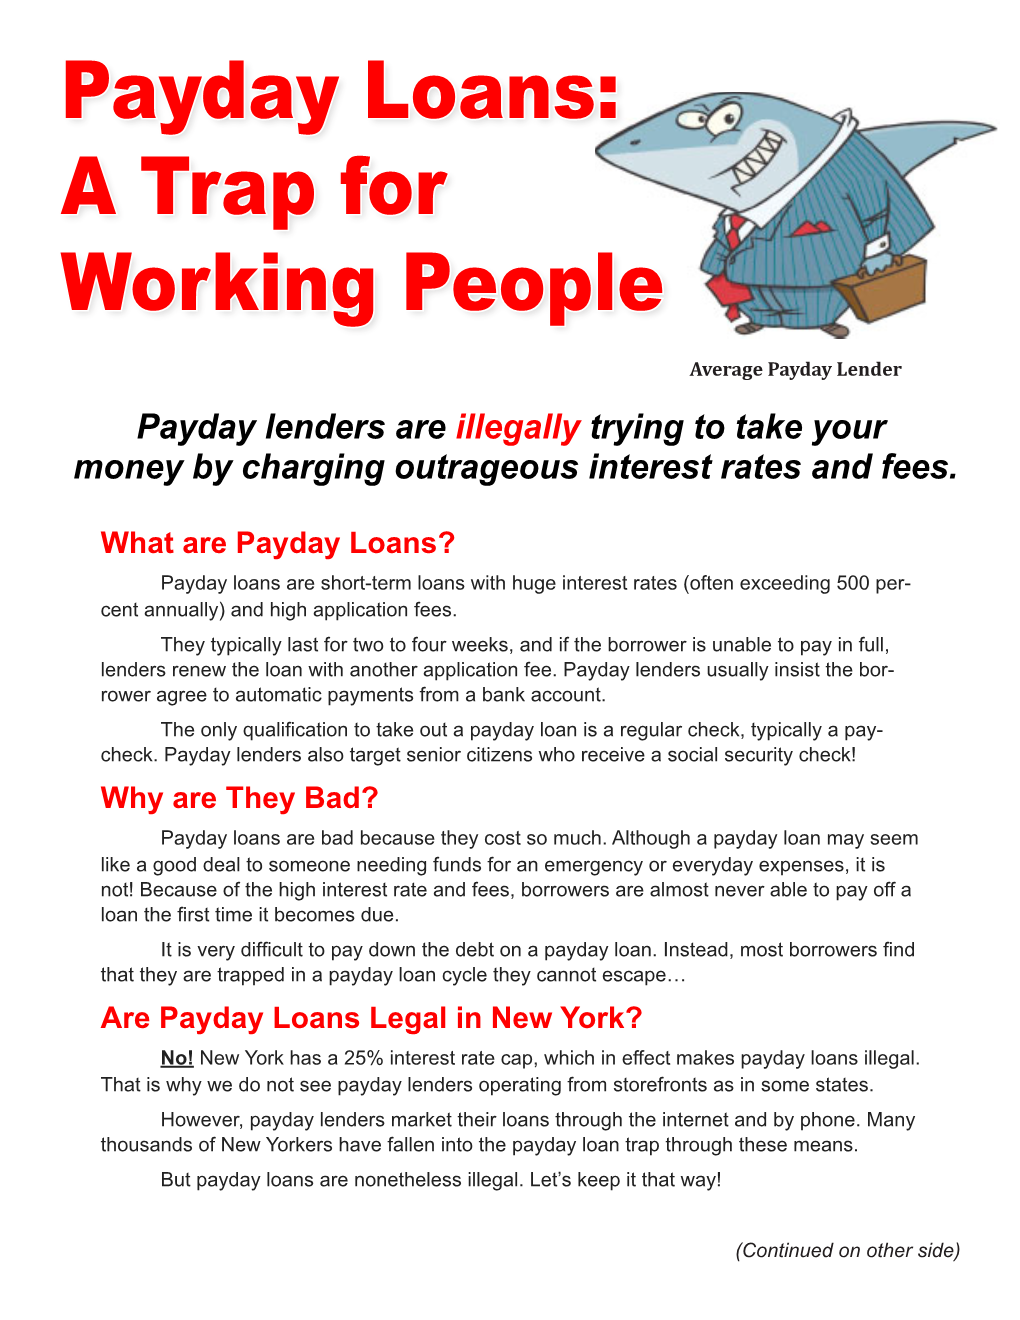 Payday Loans: a Trap for Working People